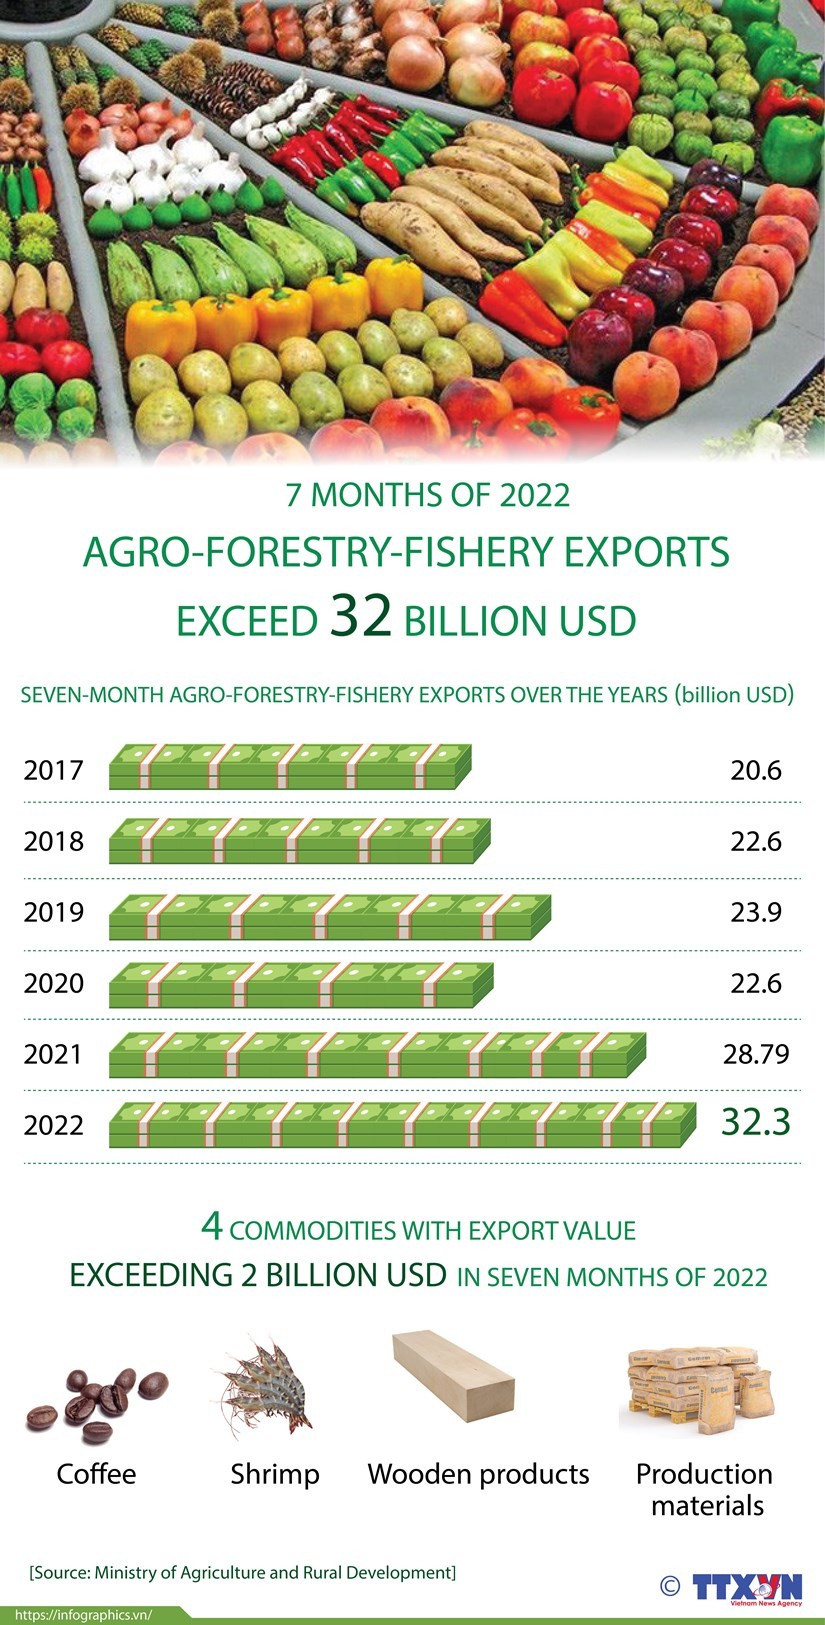 Agro-forestry-fishery exports exceed 32 billion USD in first 7 months